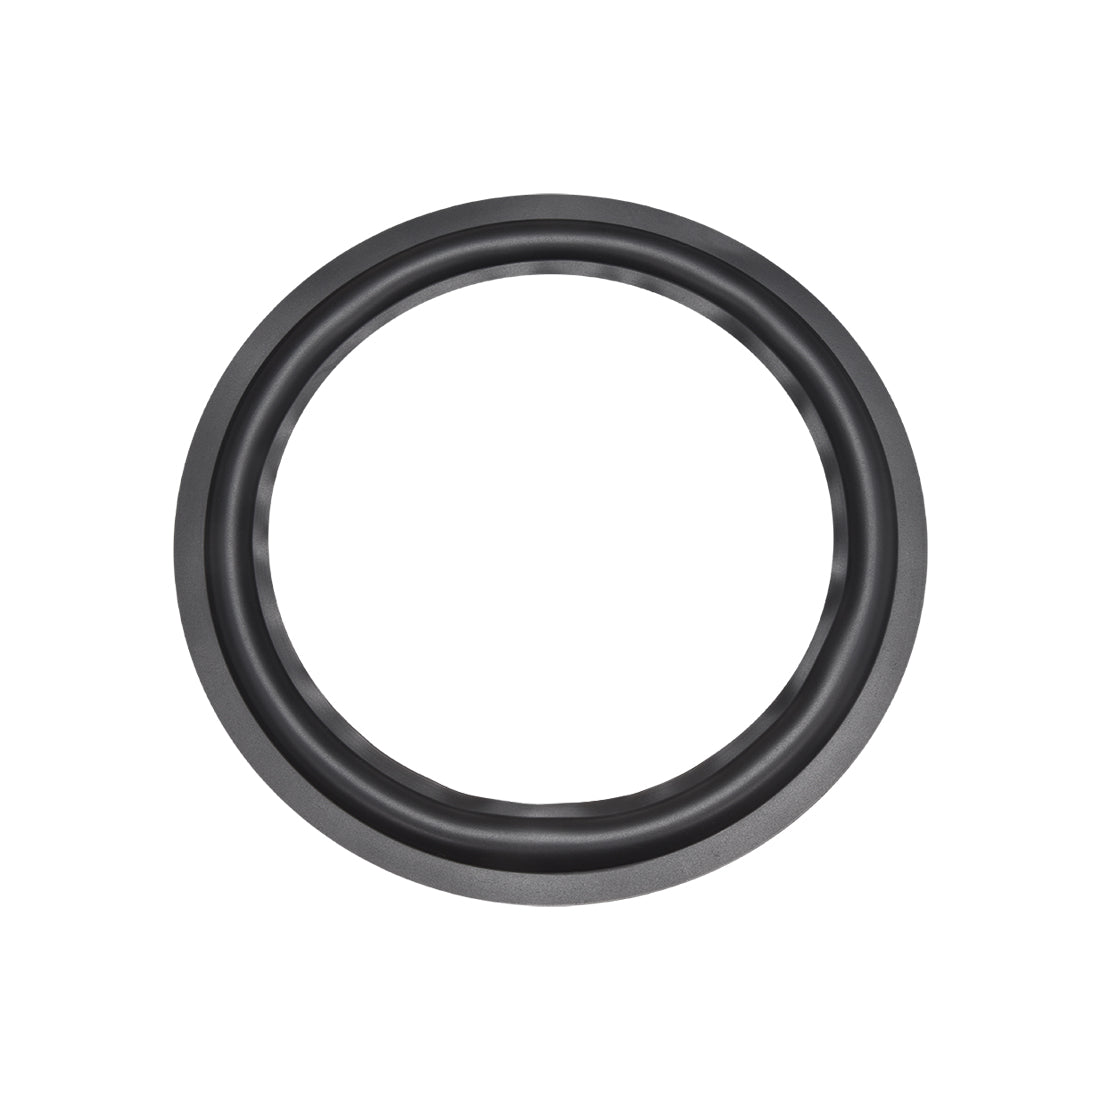 uxcell Uxcell 11.5" 11.5inch Speaker Rubber Edge Surround Rings Replacement Part for Speaker Repair or DIY